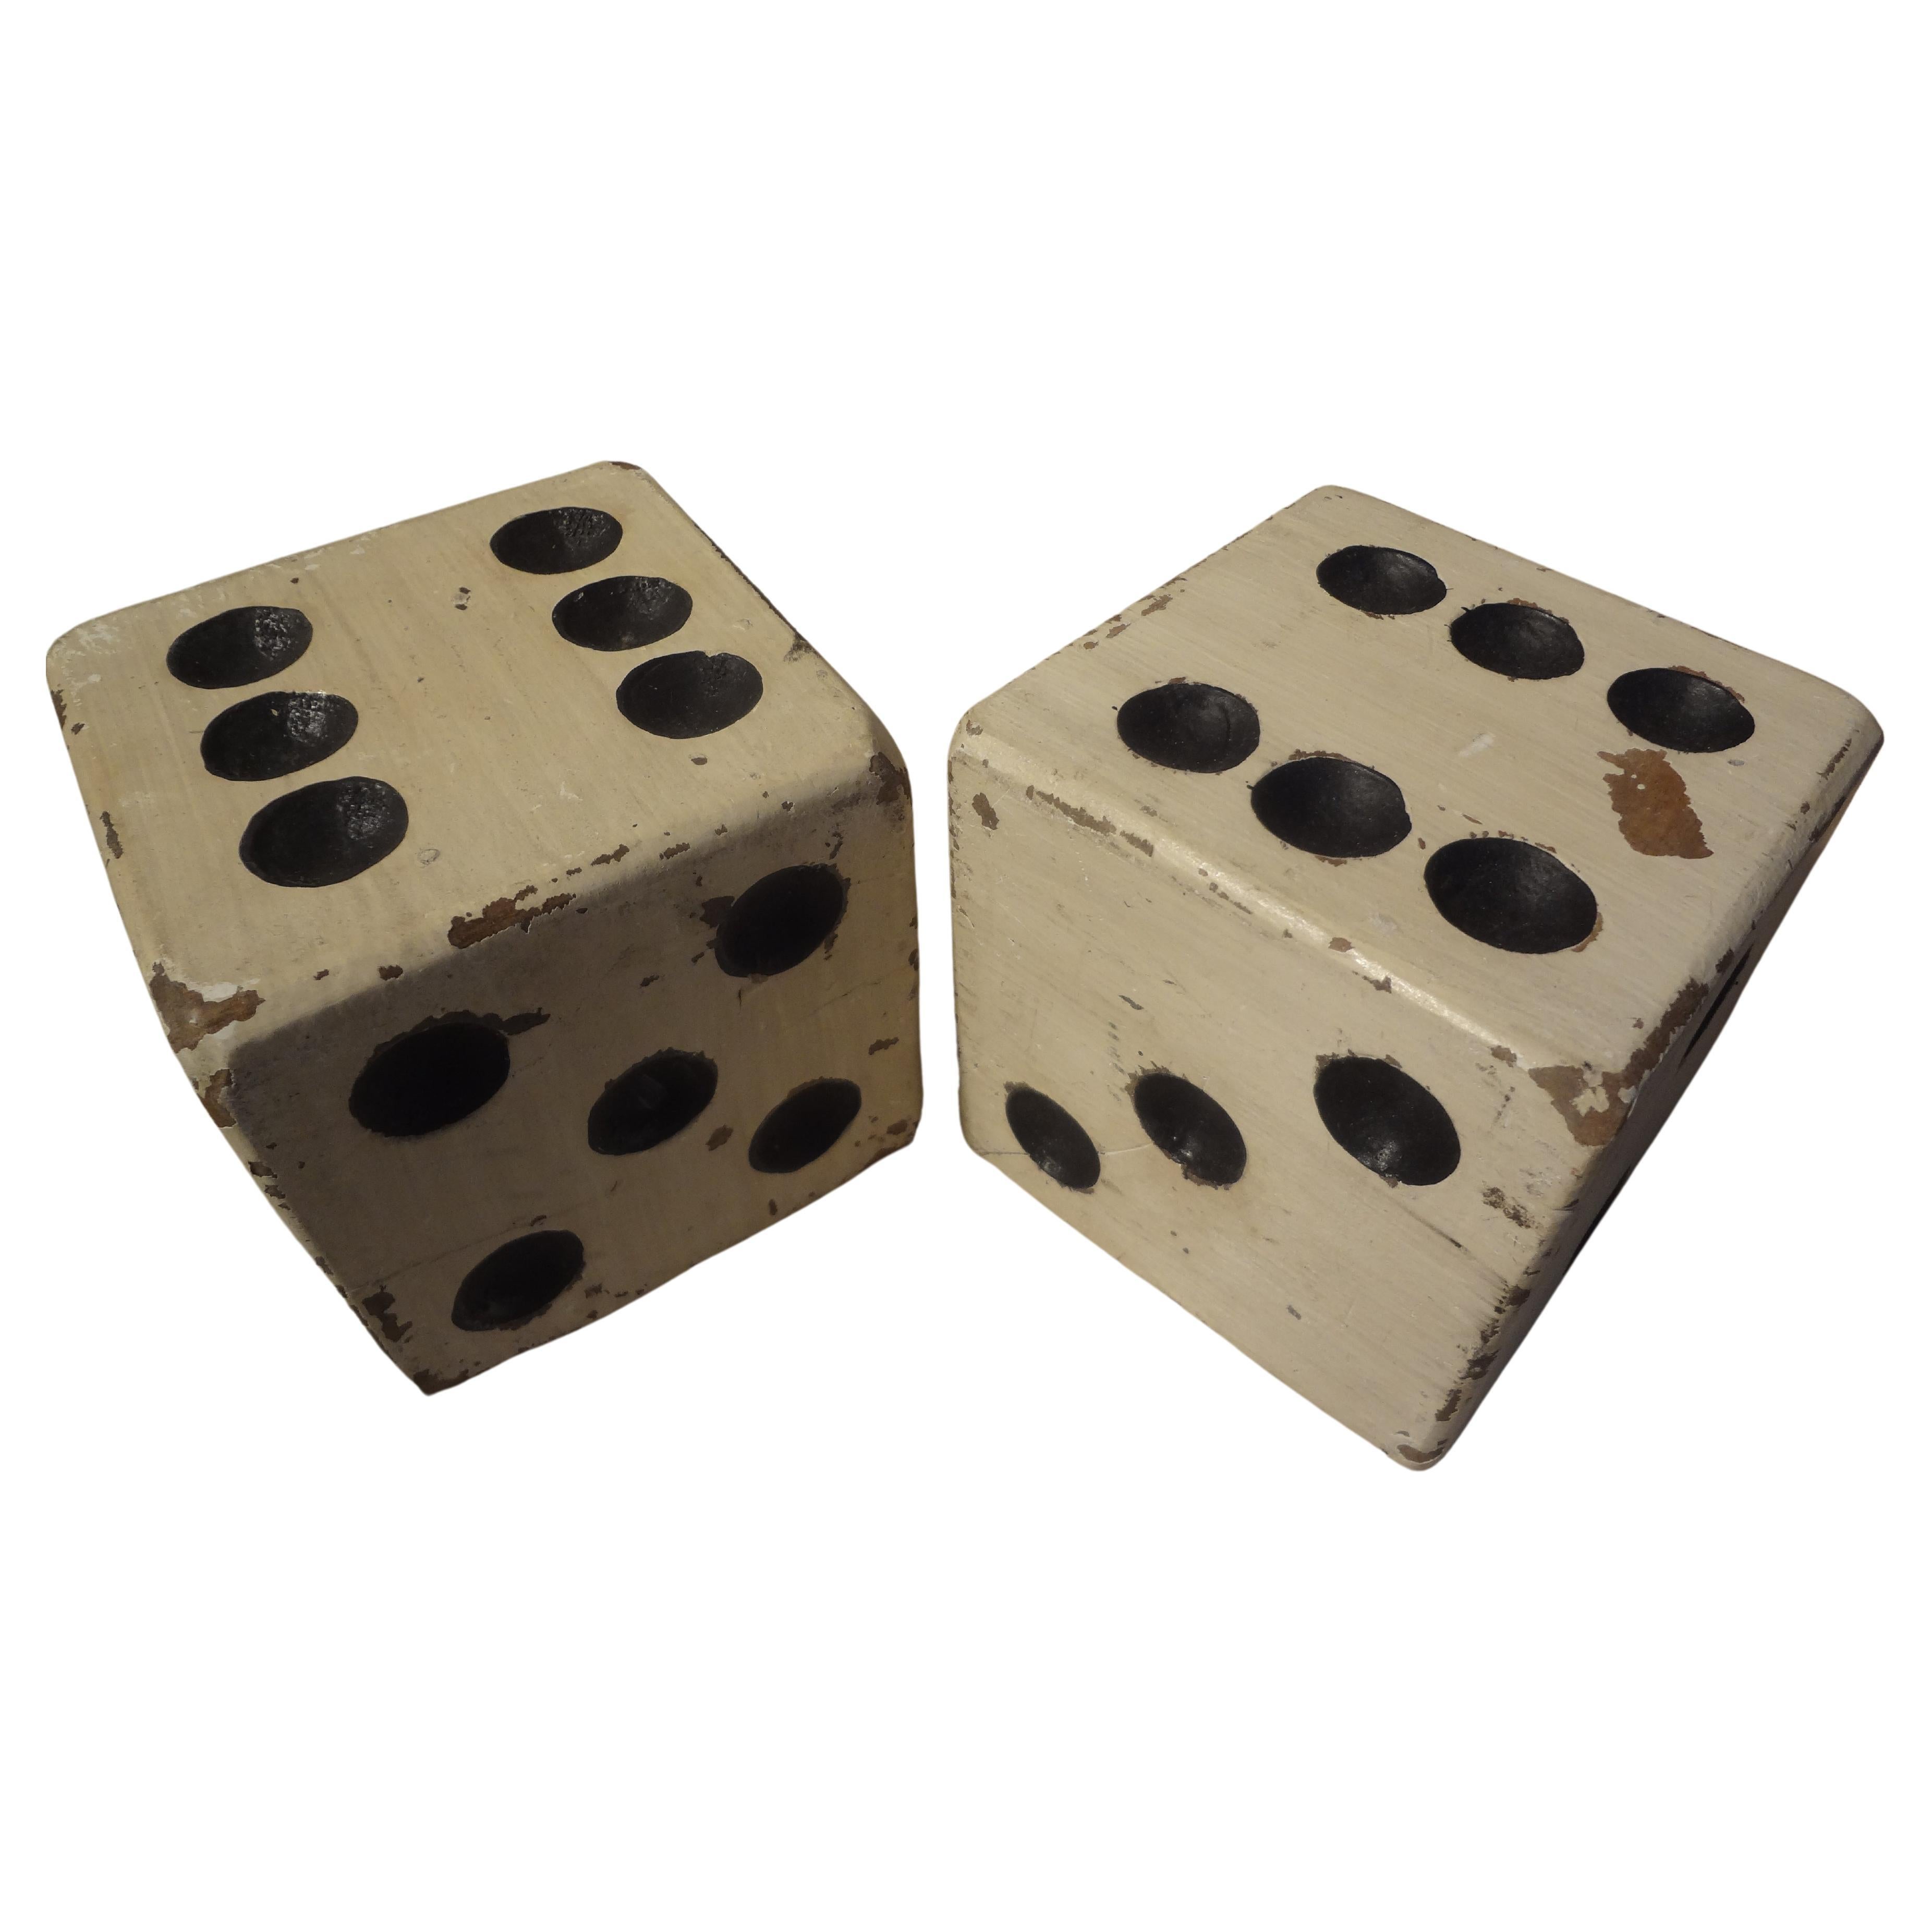 Vintage Large Solid Wood Dice 7cm Square Hand Made 3 sizes UK Made 